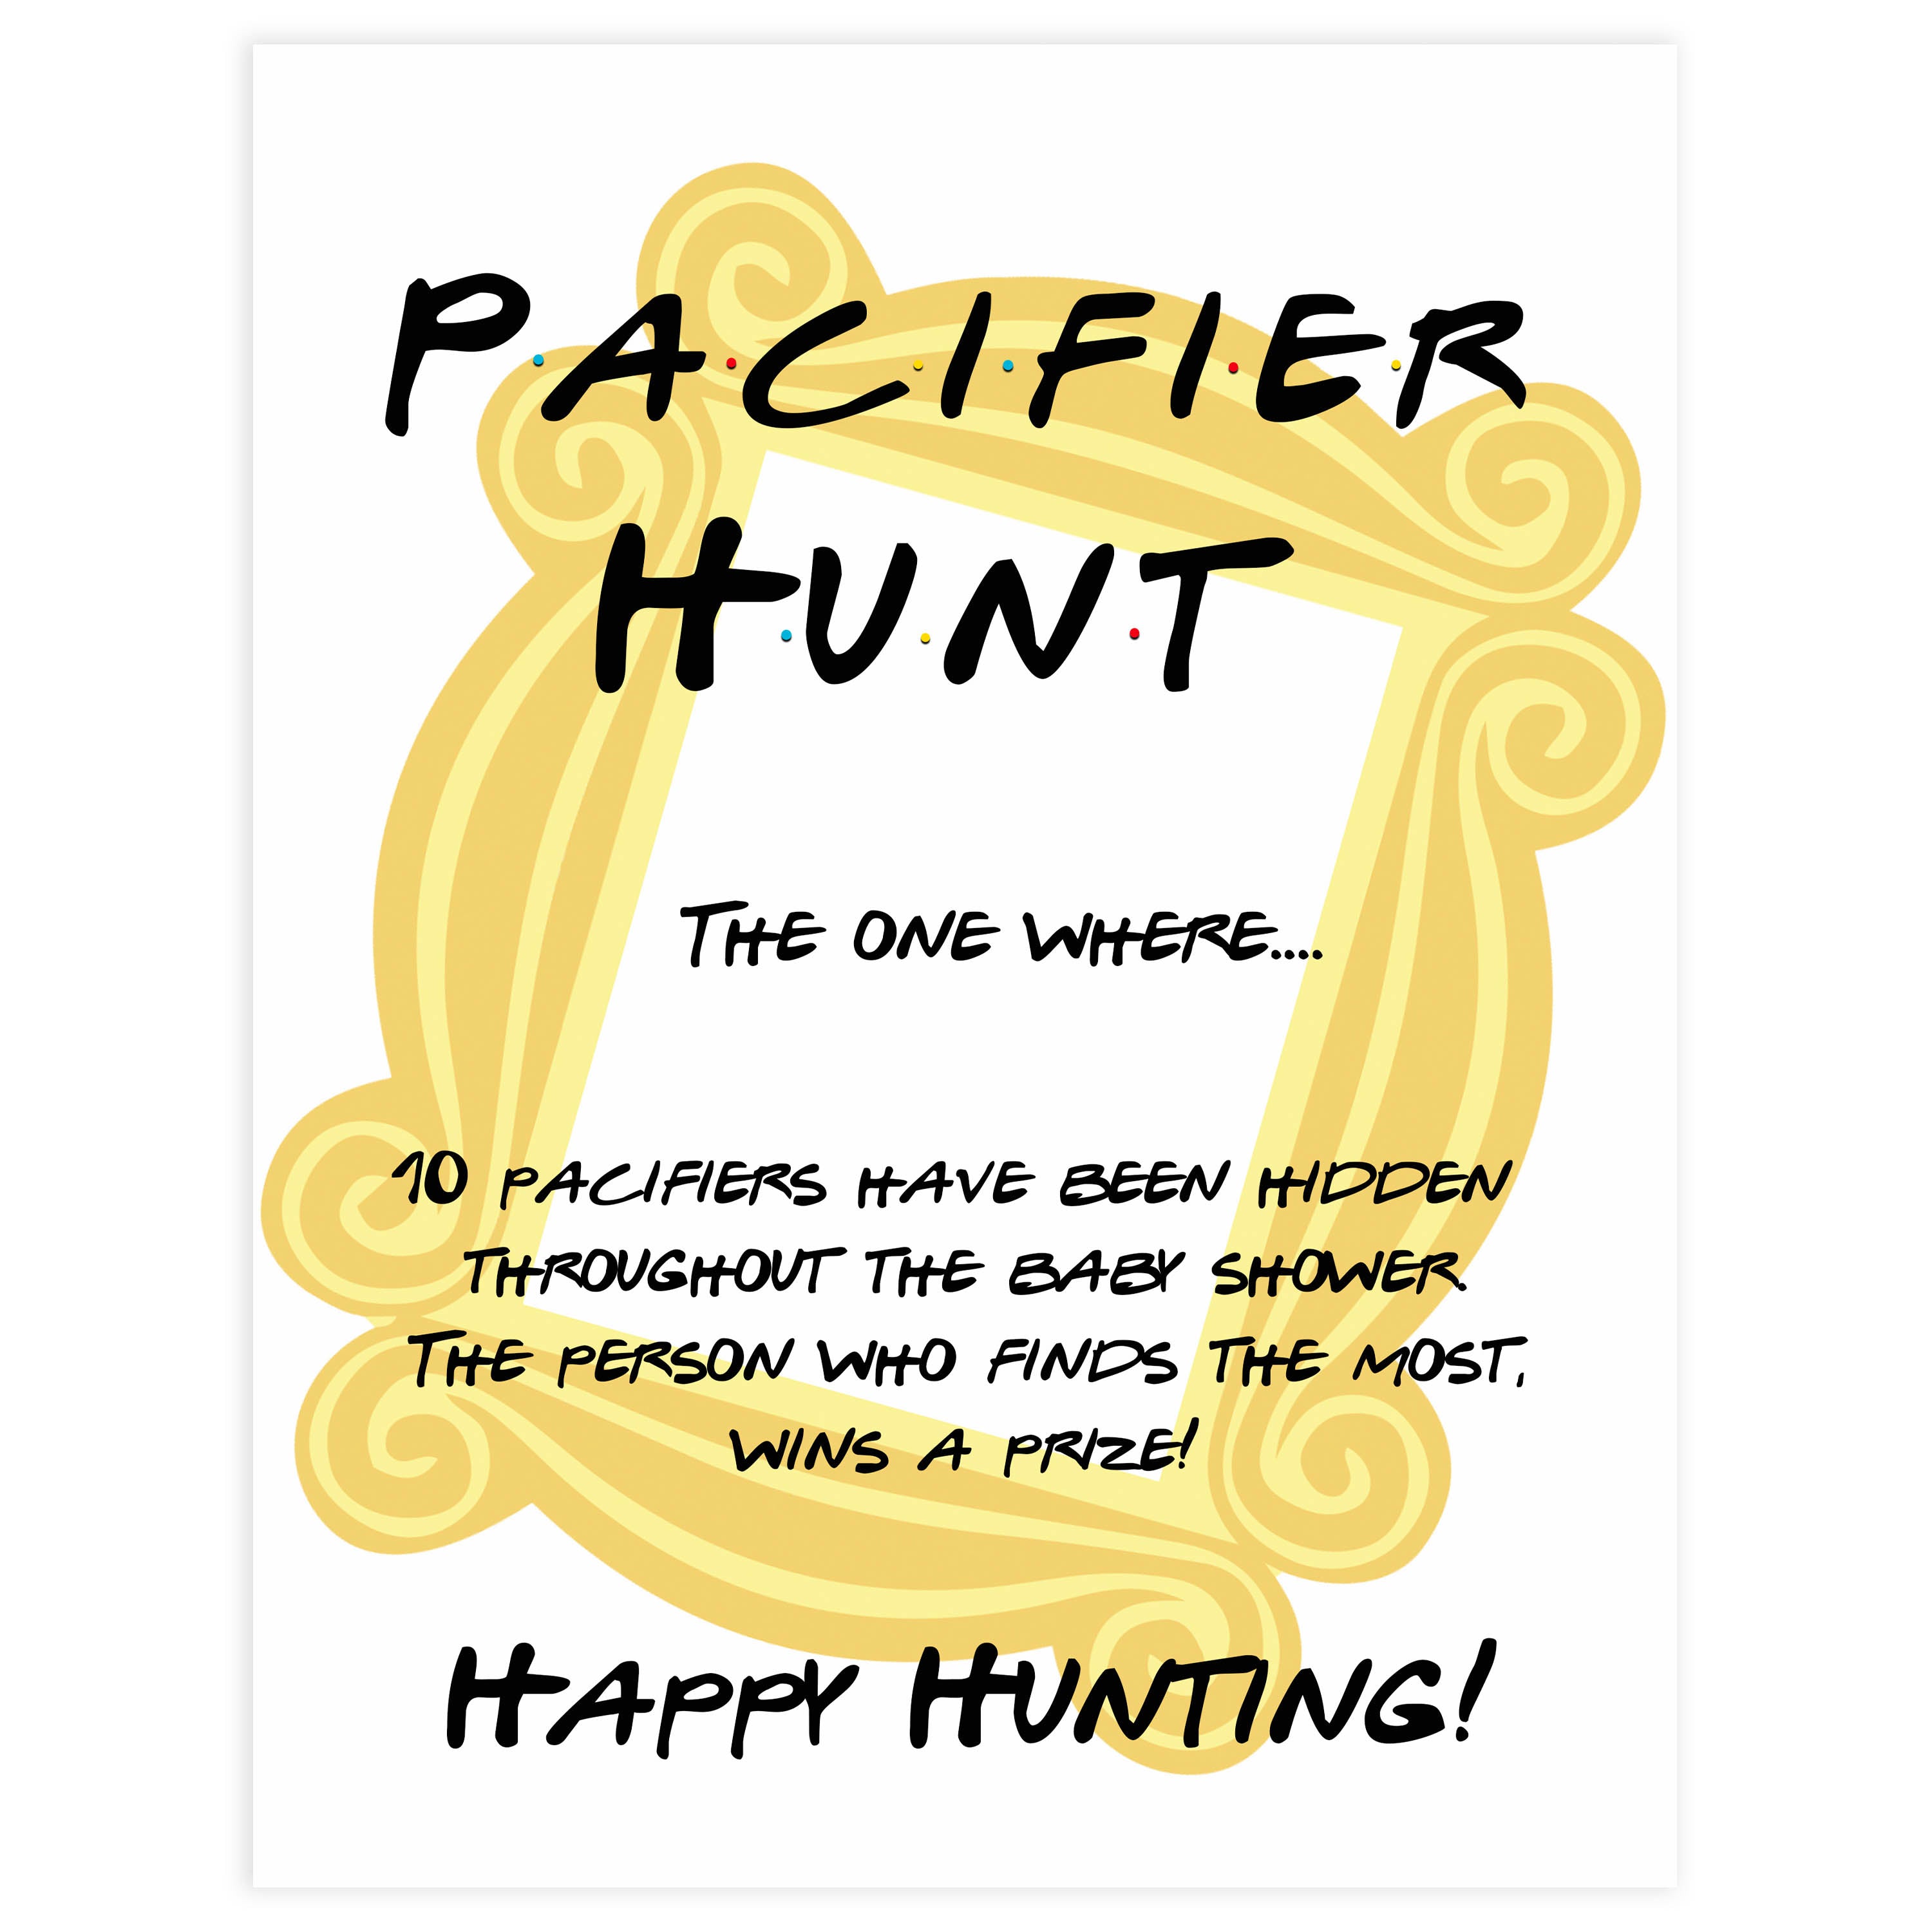 pacifier hunt baby game, Printable baby shower games, friends fun baby games, baby shower games, fun baby shower ideas, top baby shower ideas, friends baby shower, friends baby shower ideas